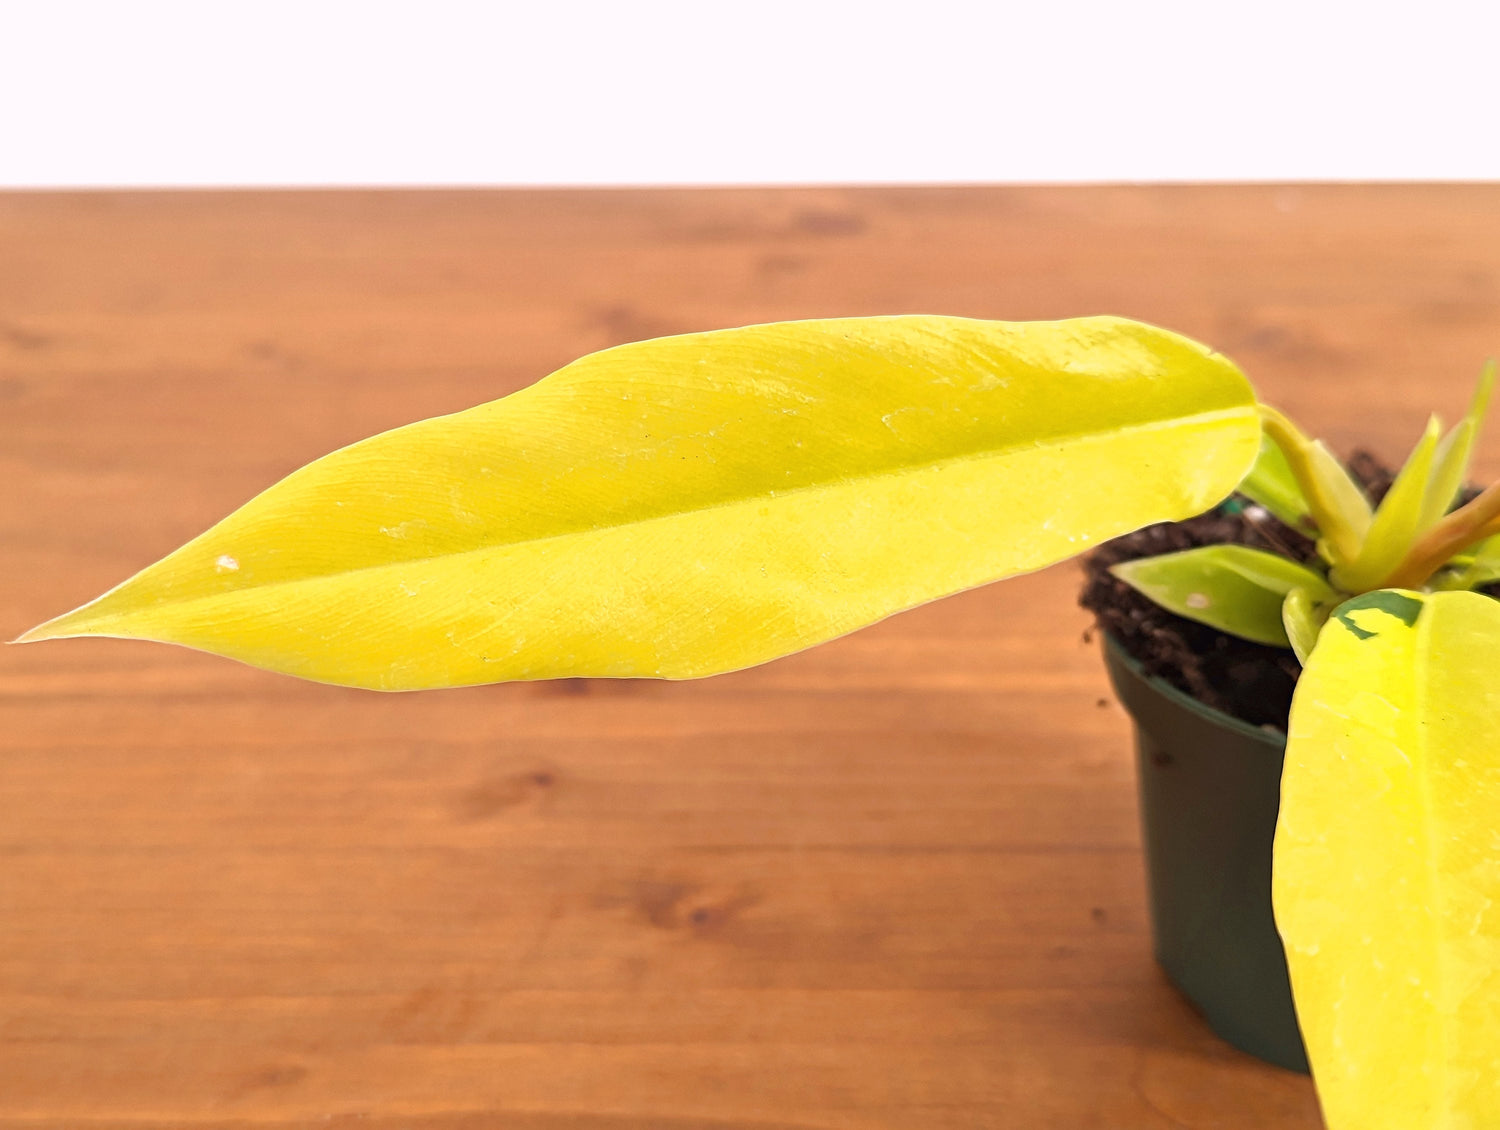 Philodendron Golden Crocodile - 3 Inc Pot - FREE Shipping Eligible